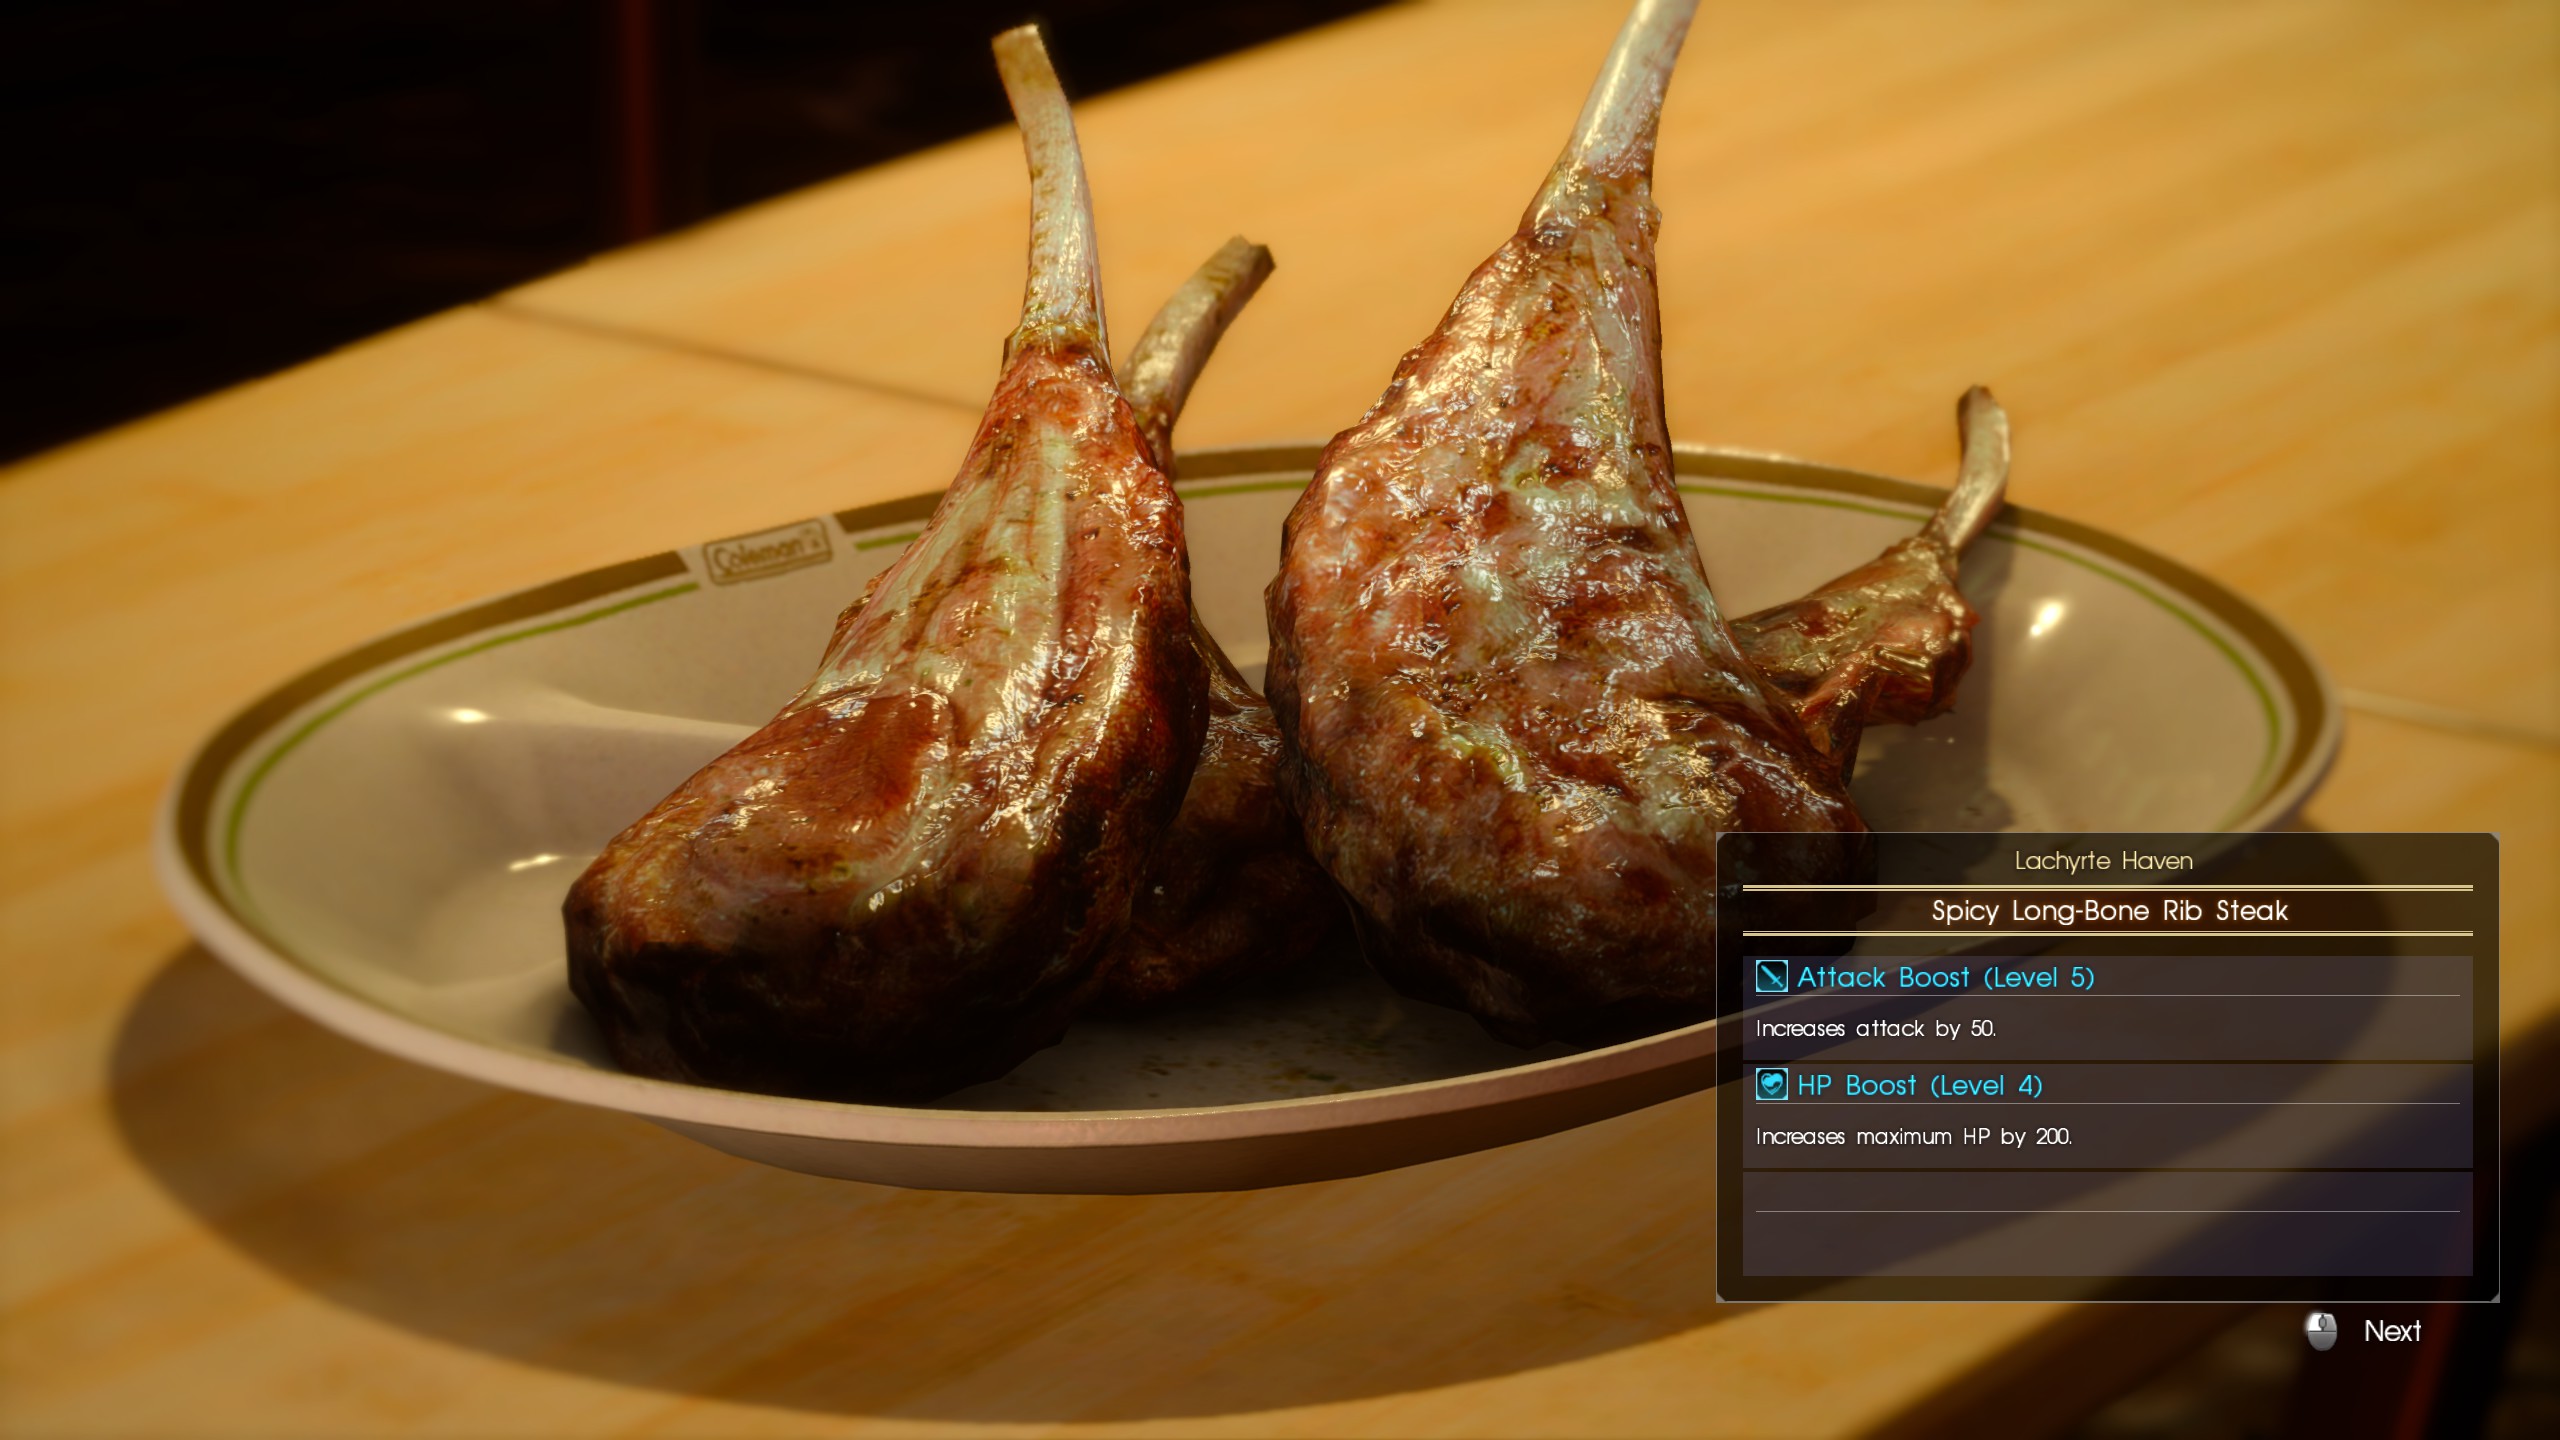 A plate of delicious spicy longbone rib steak as rendered in Final Fantasy XV